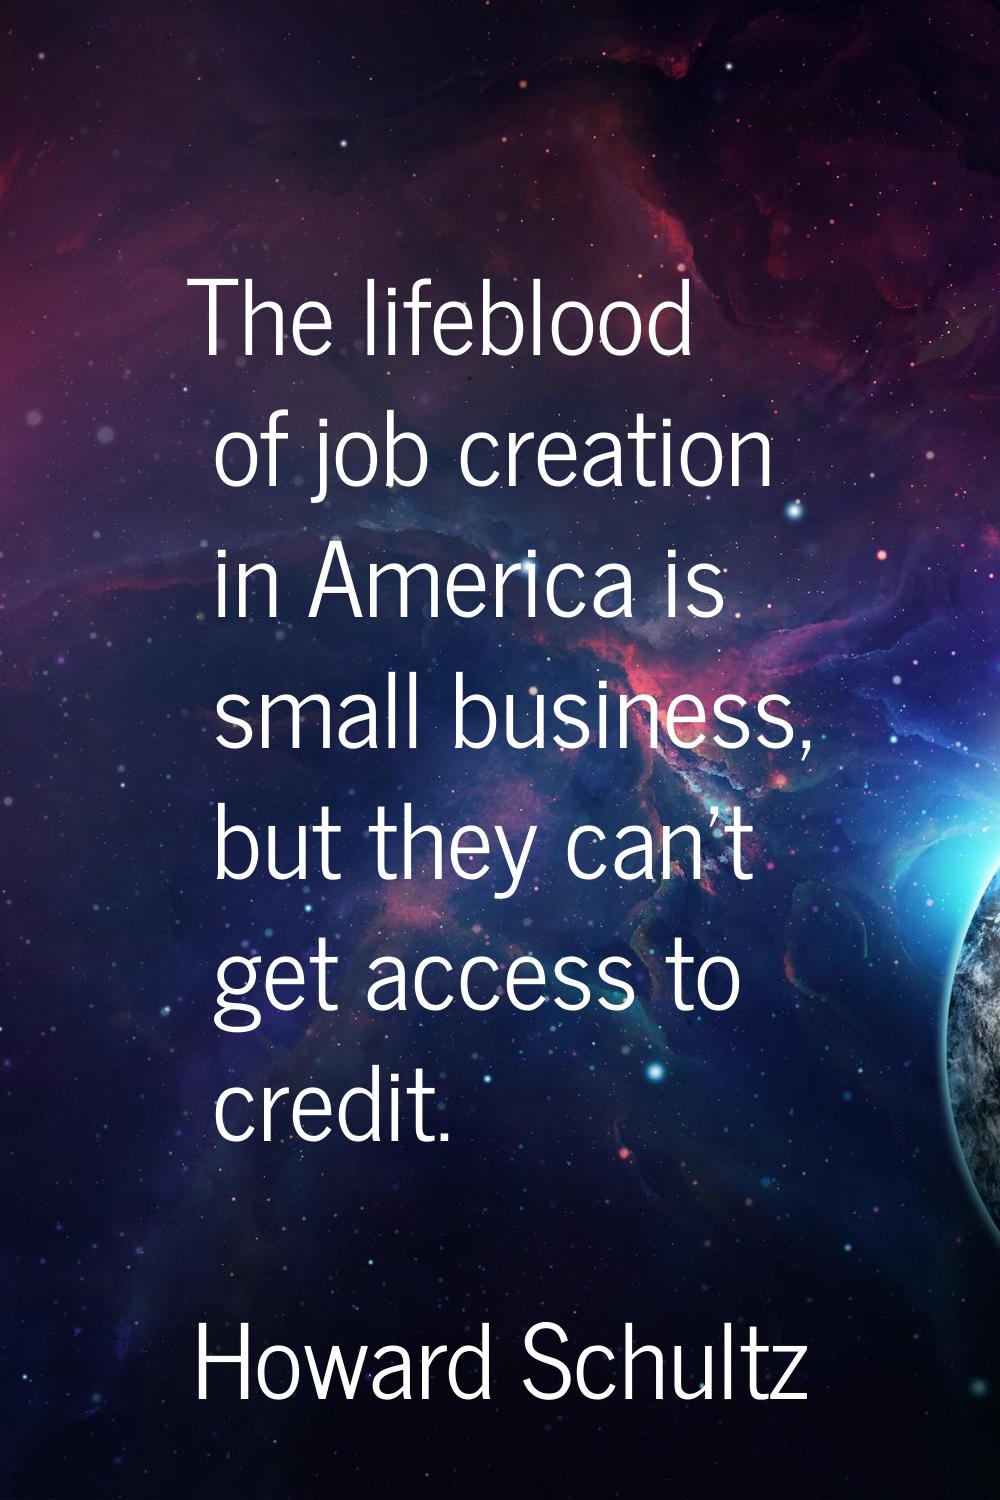 The lifeblood of job creation in America is small business, but they can't get access to credit.